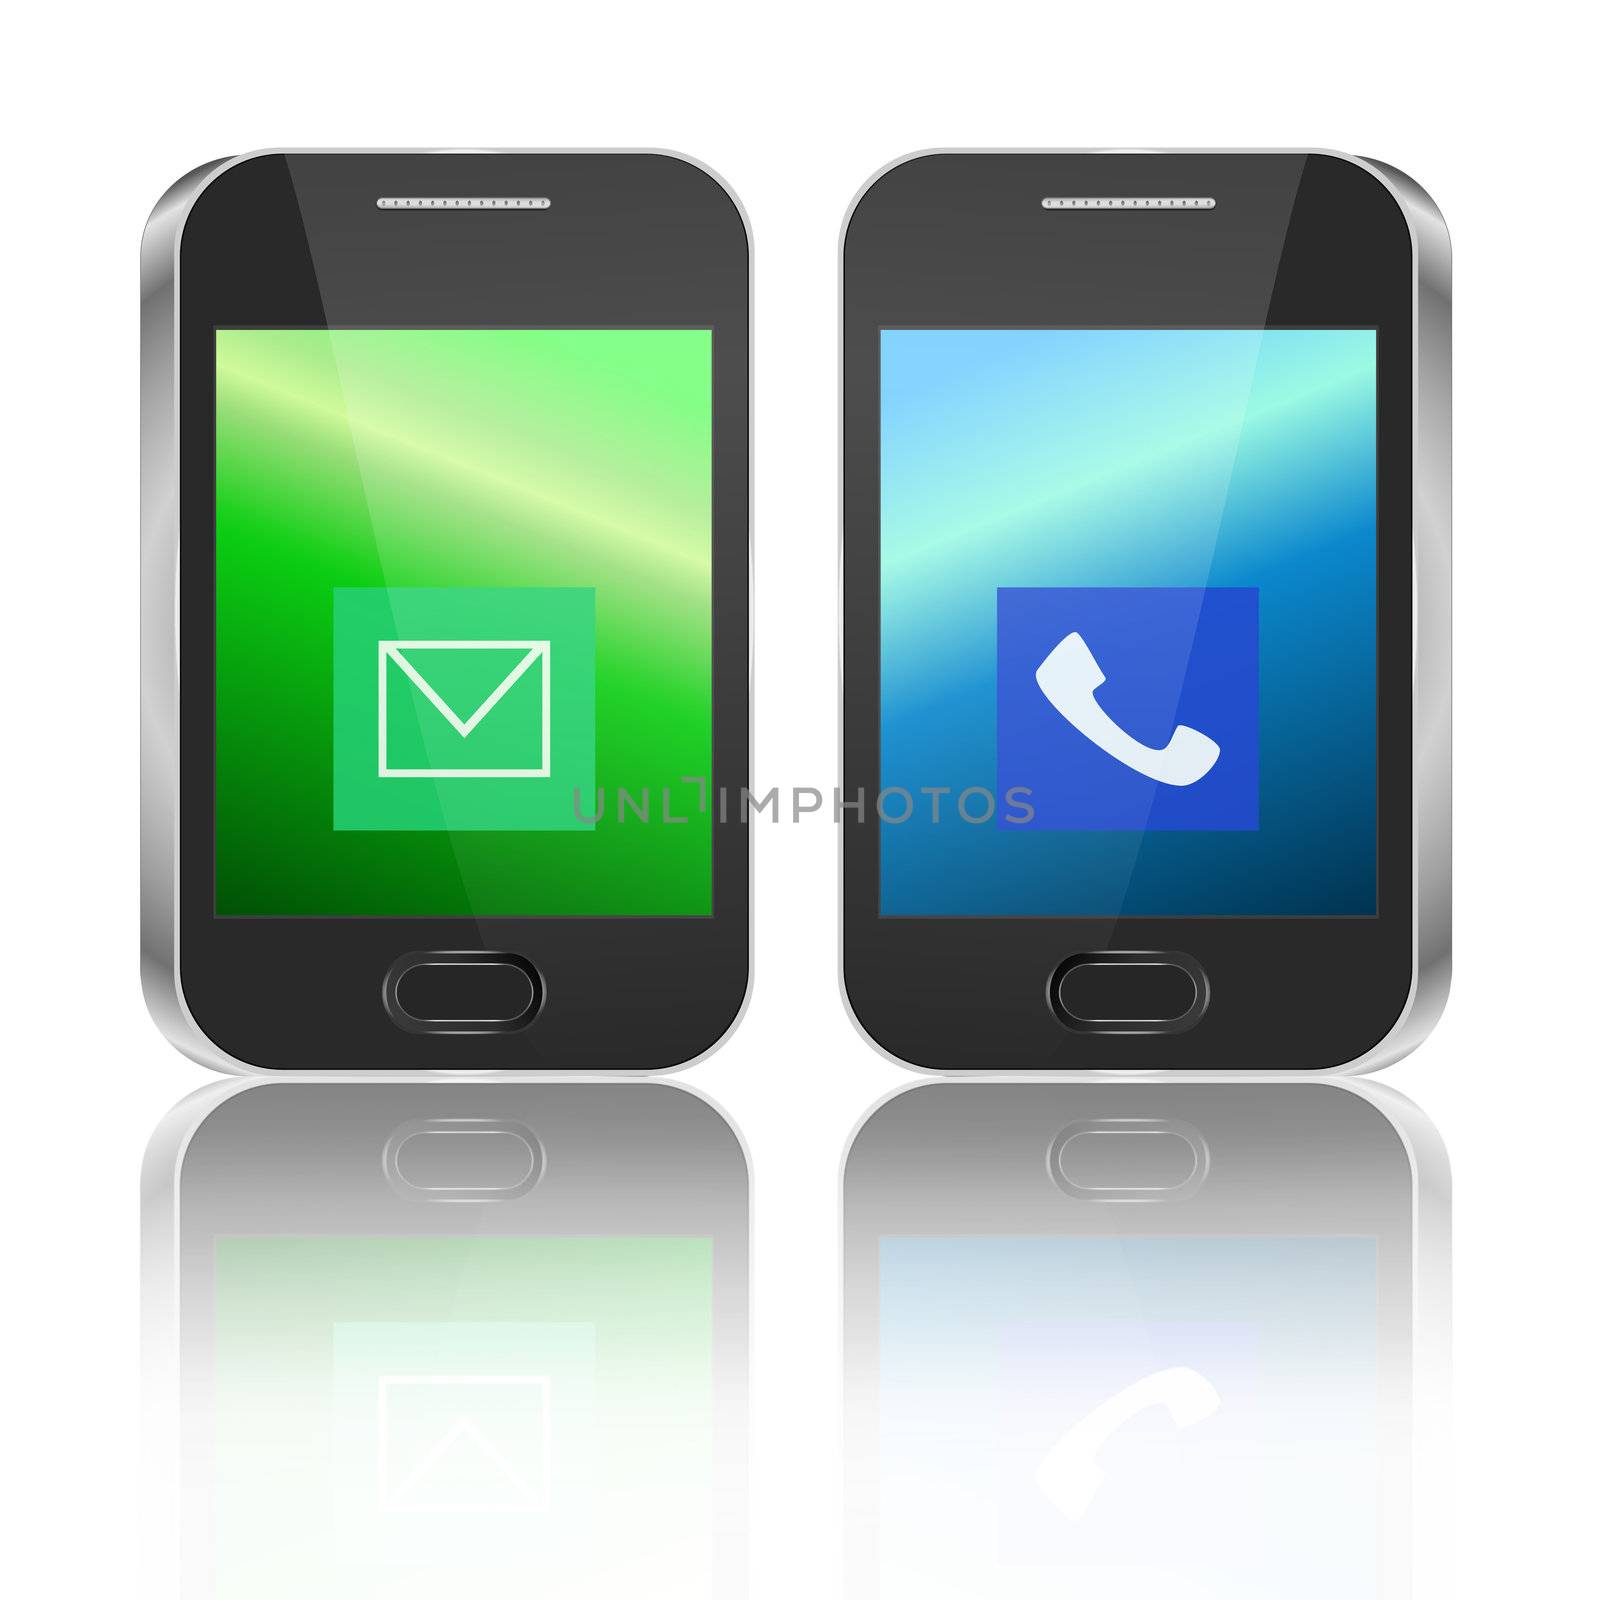 Illustration depicting two illuminated communication devices with various icon displays arranged horizontally over white background and reflecting into the foreground.